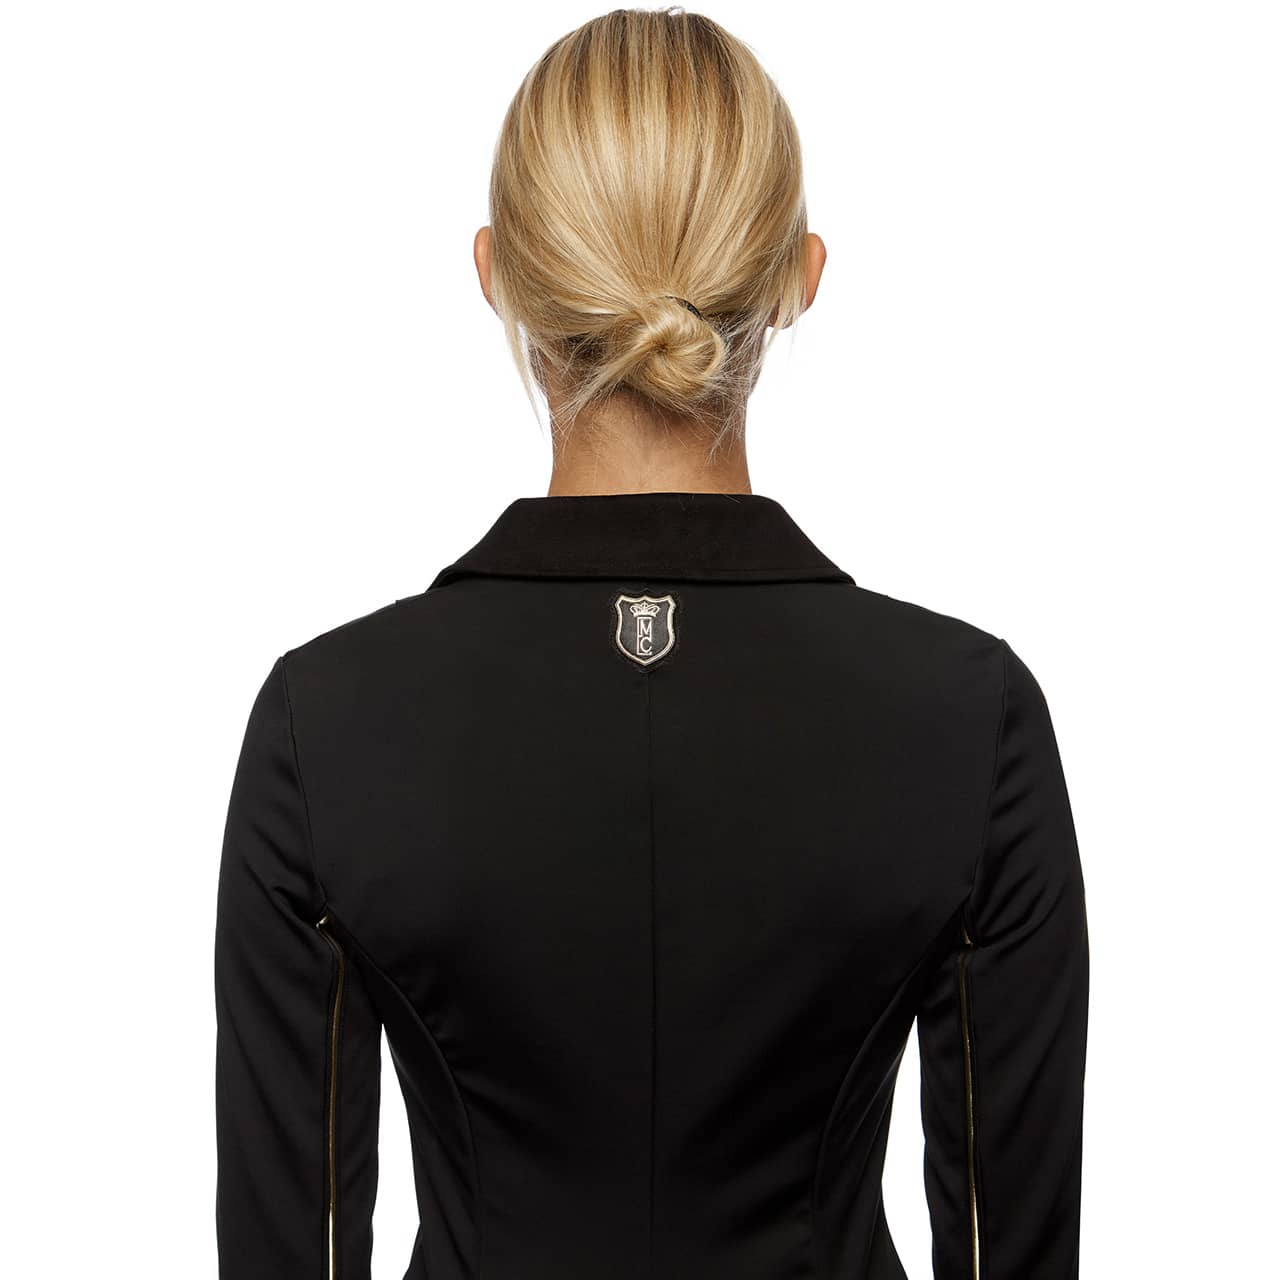 Emcee Evita Show Jacket-Southern Sport Horses-The Equestrian